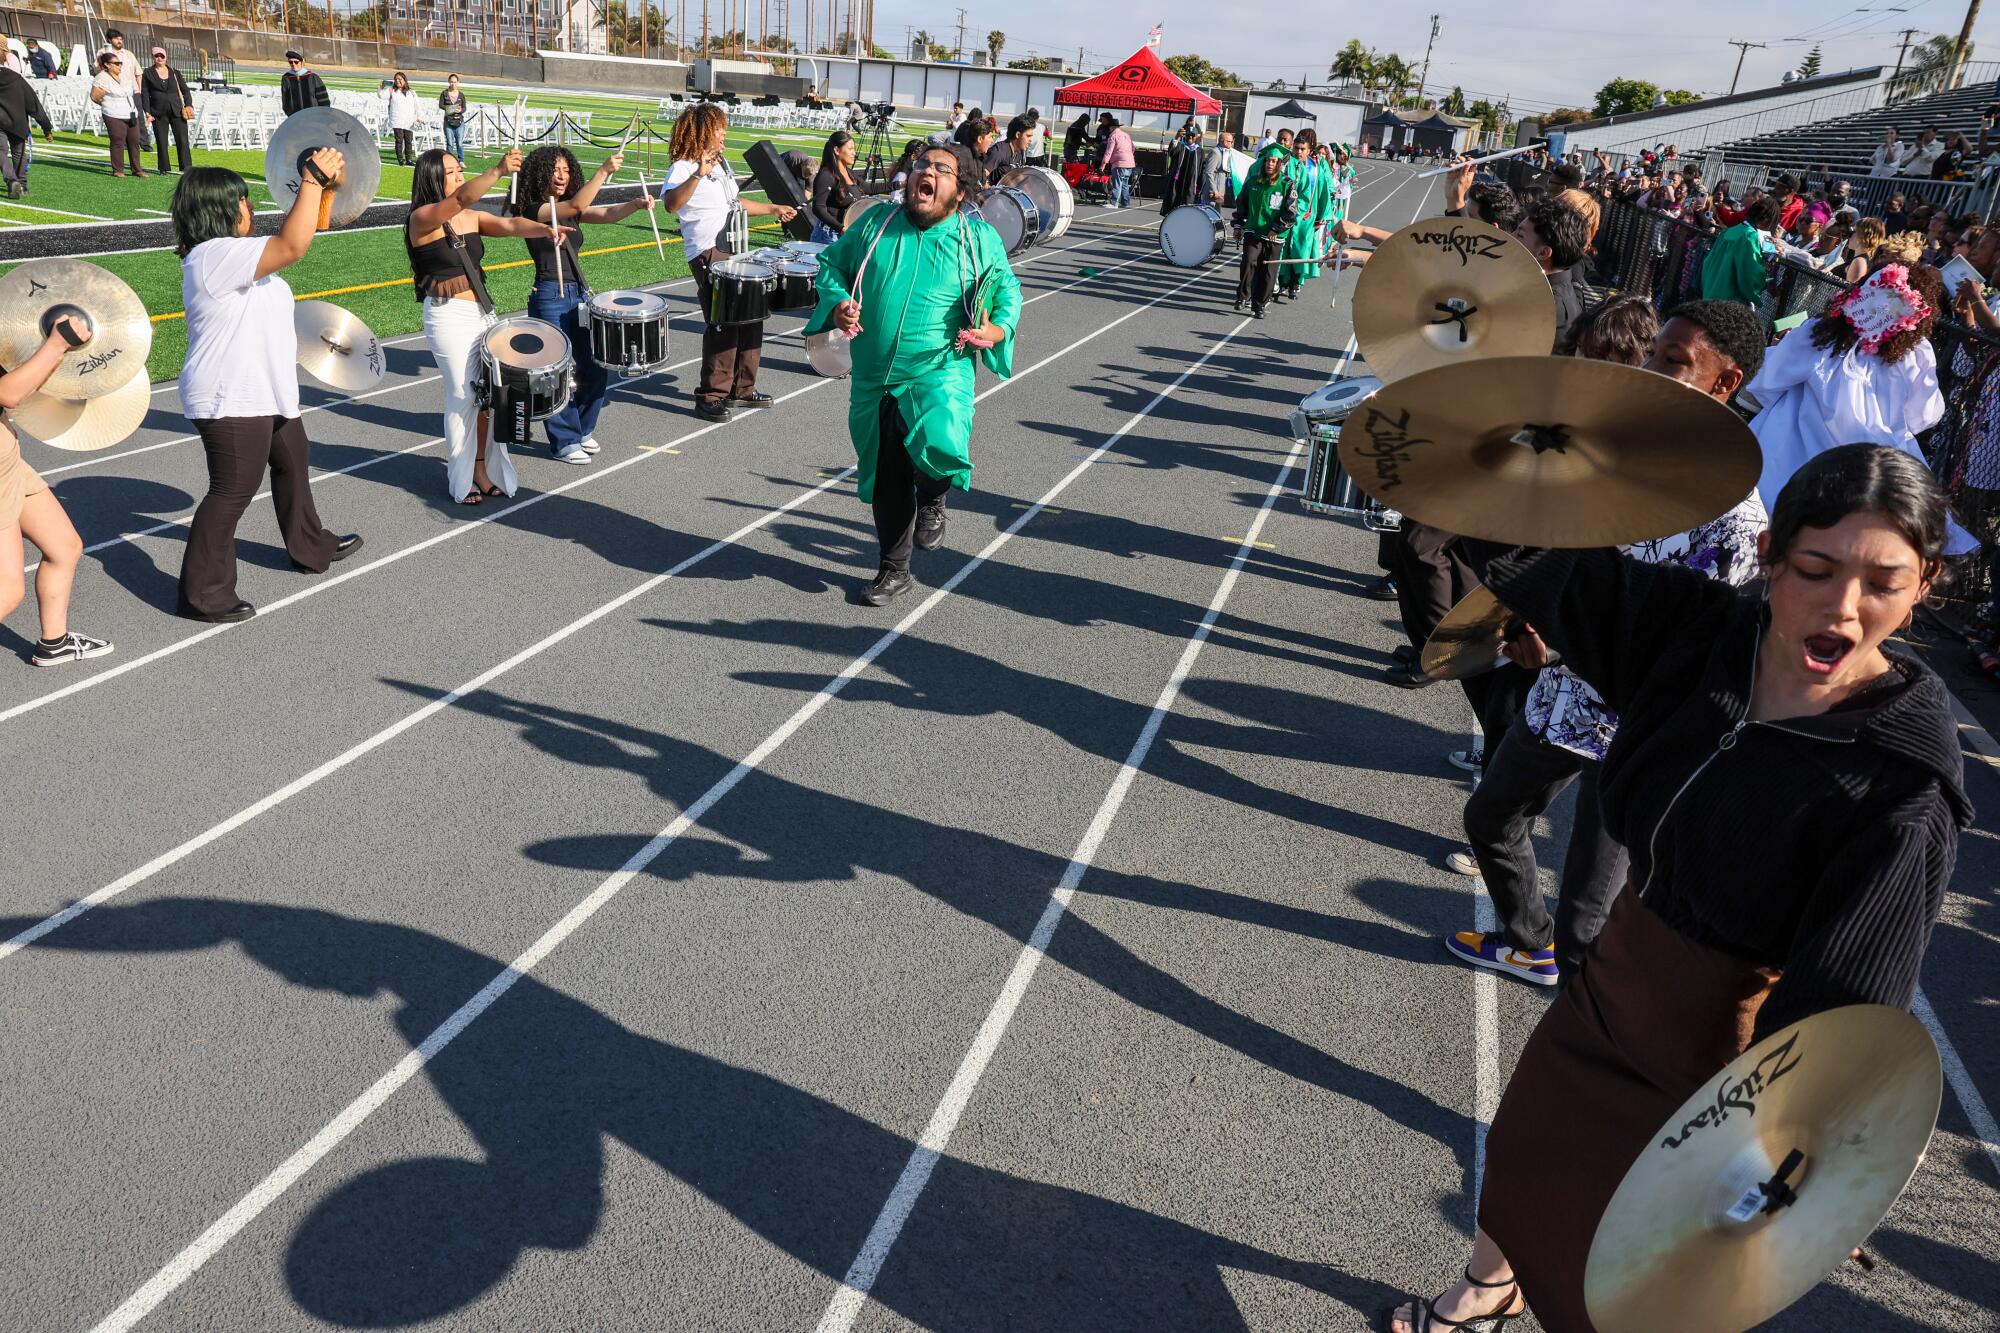 A person in a green robe runs down a track lane while band members play on both sides.